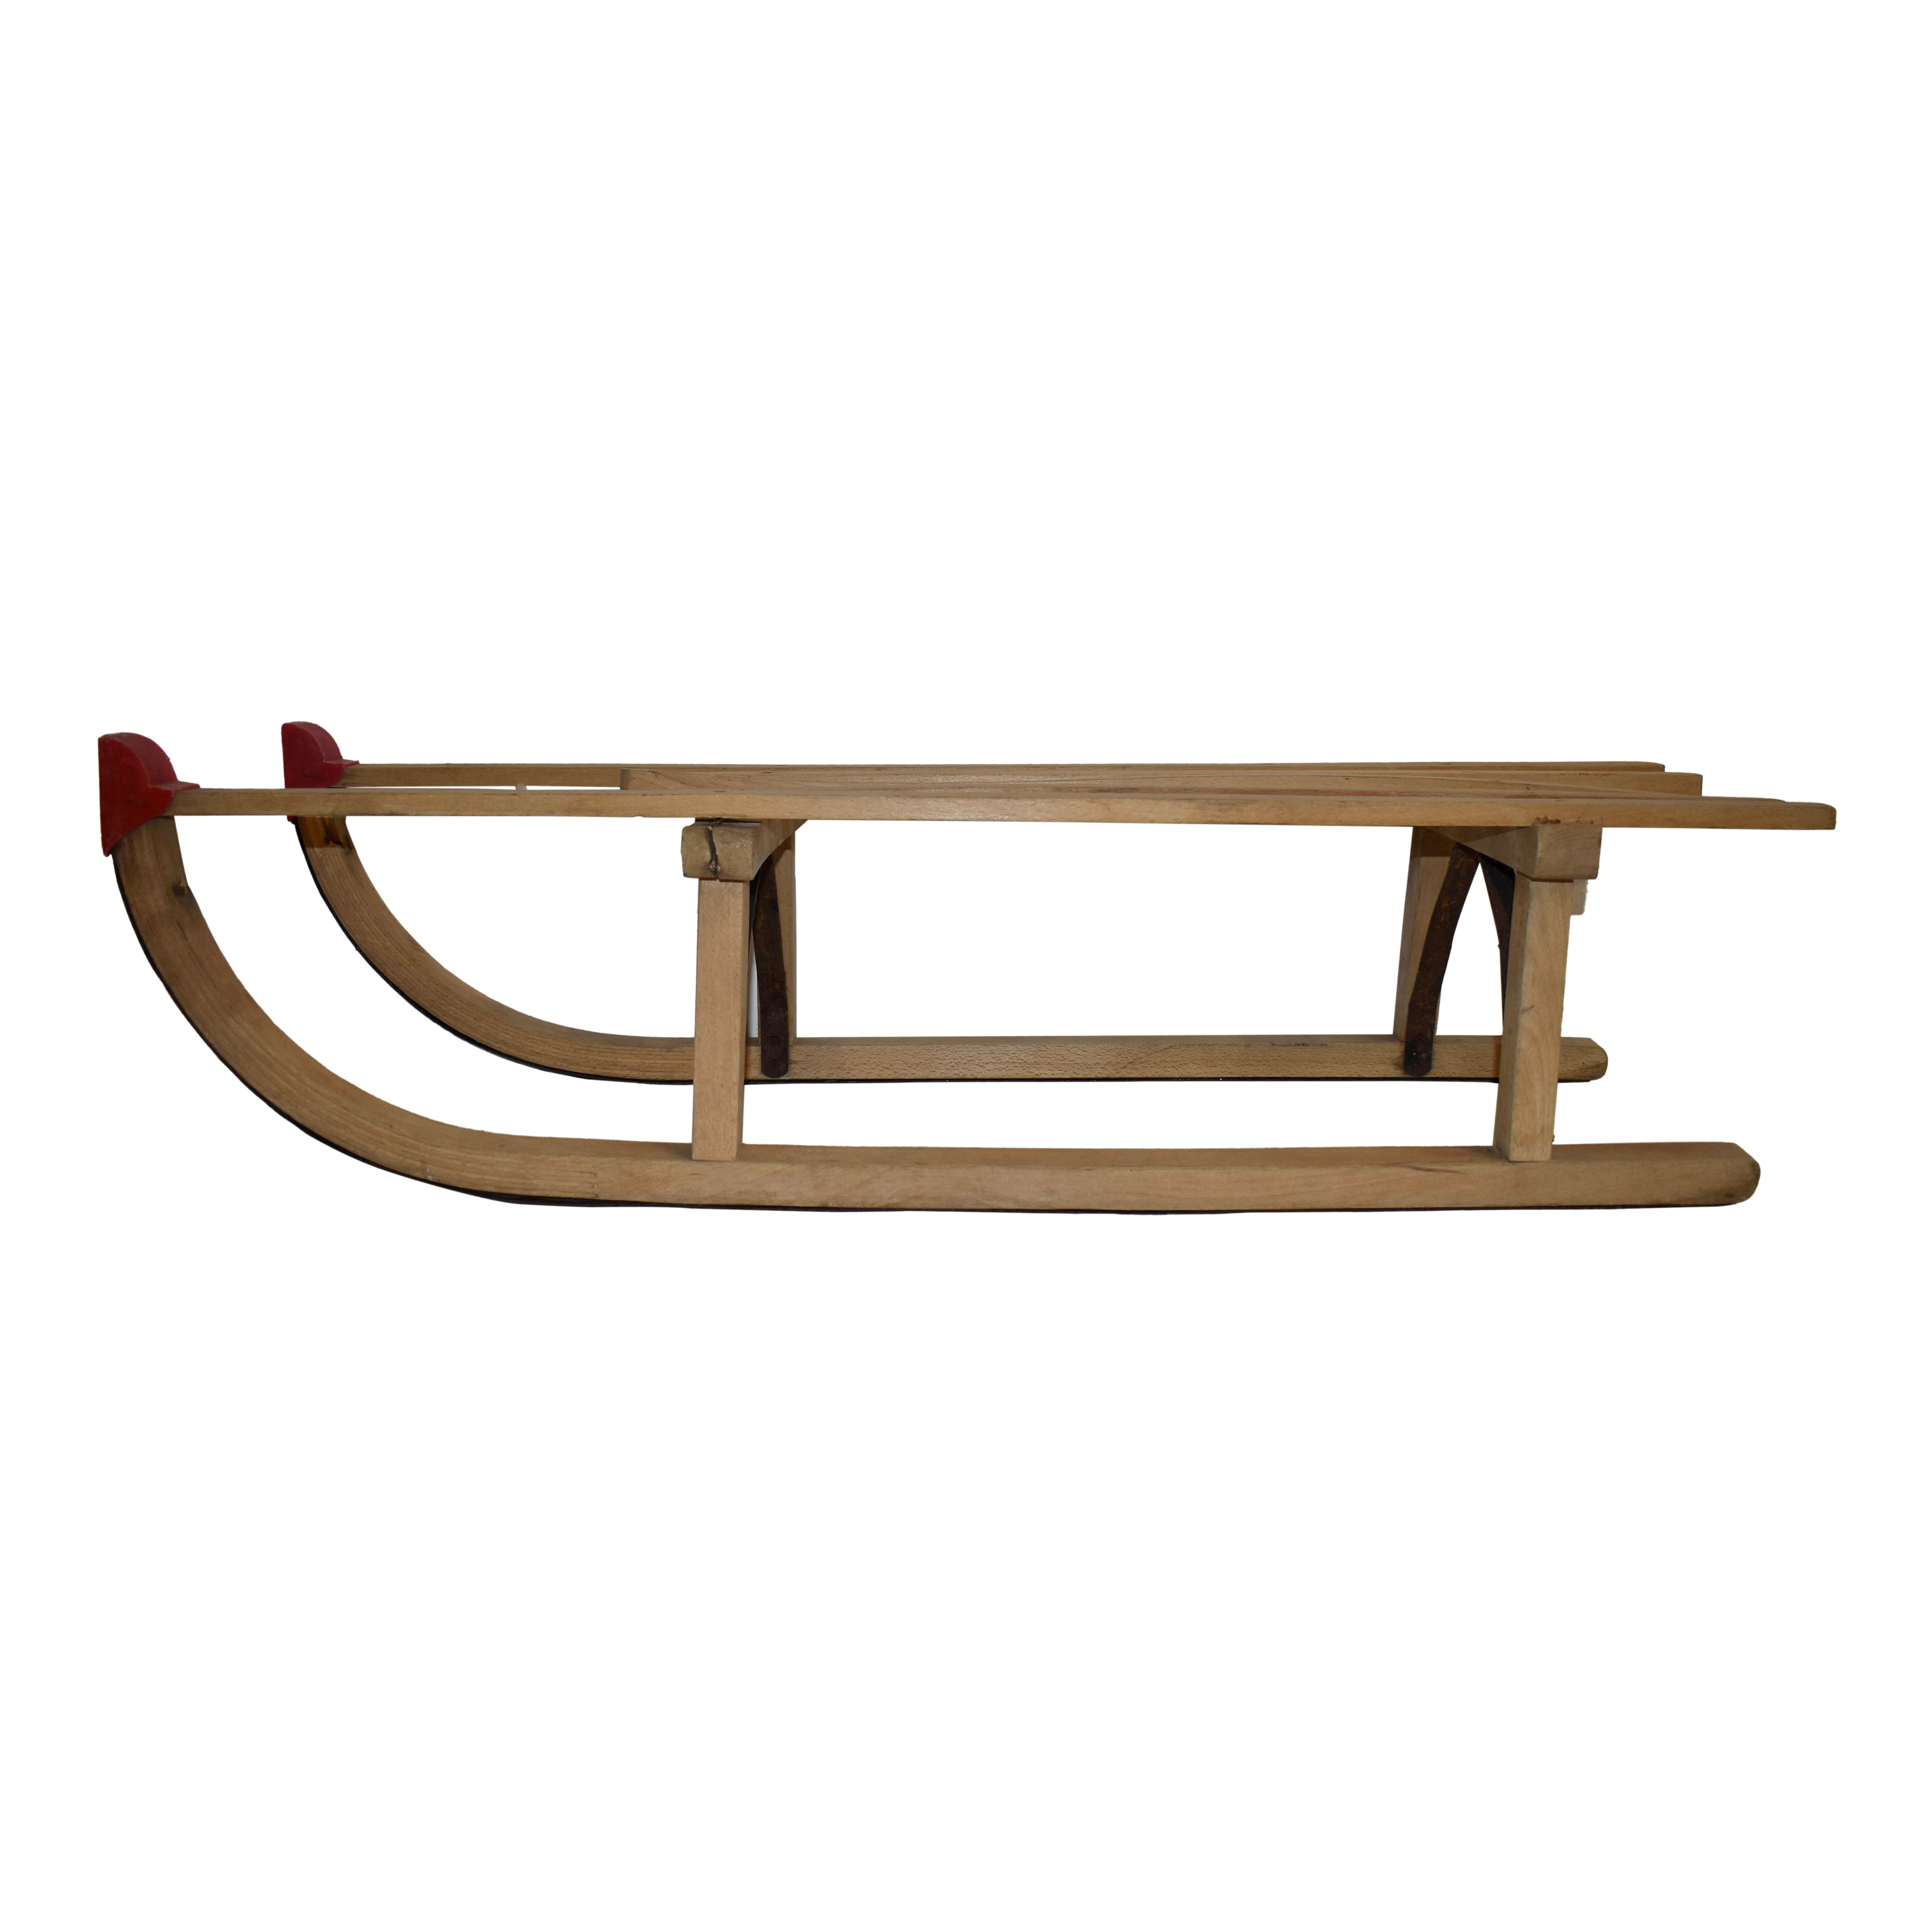 Wooden Tracker Snow Sled